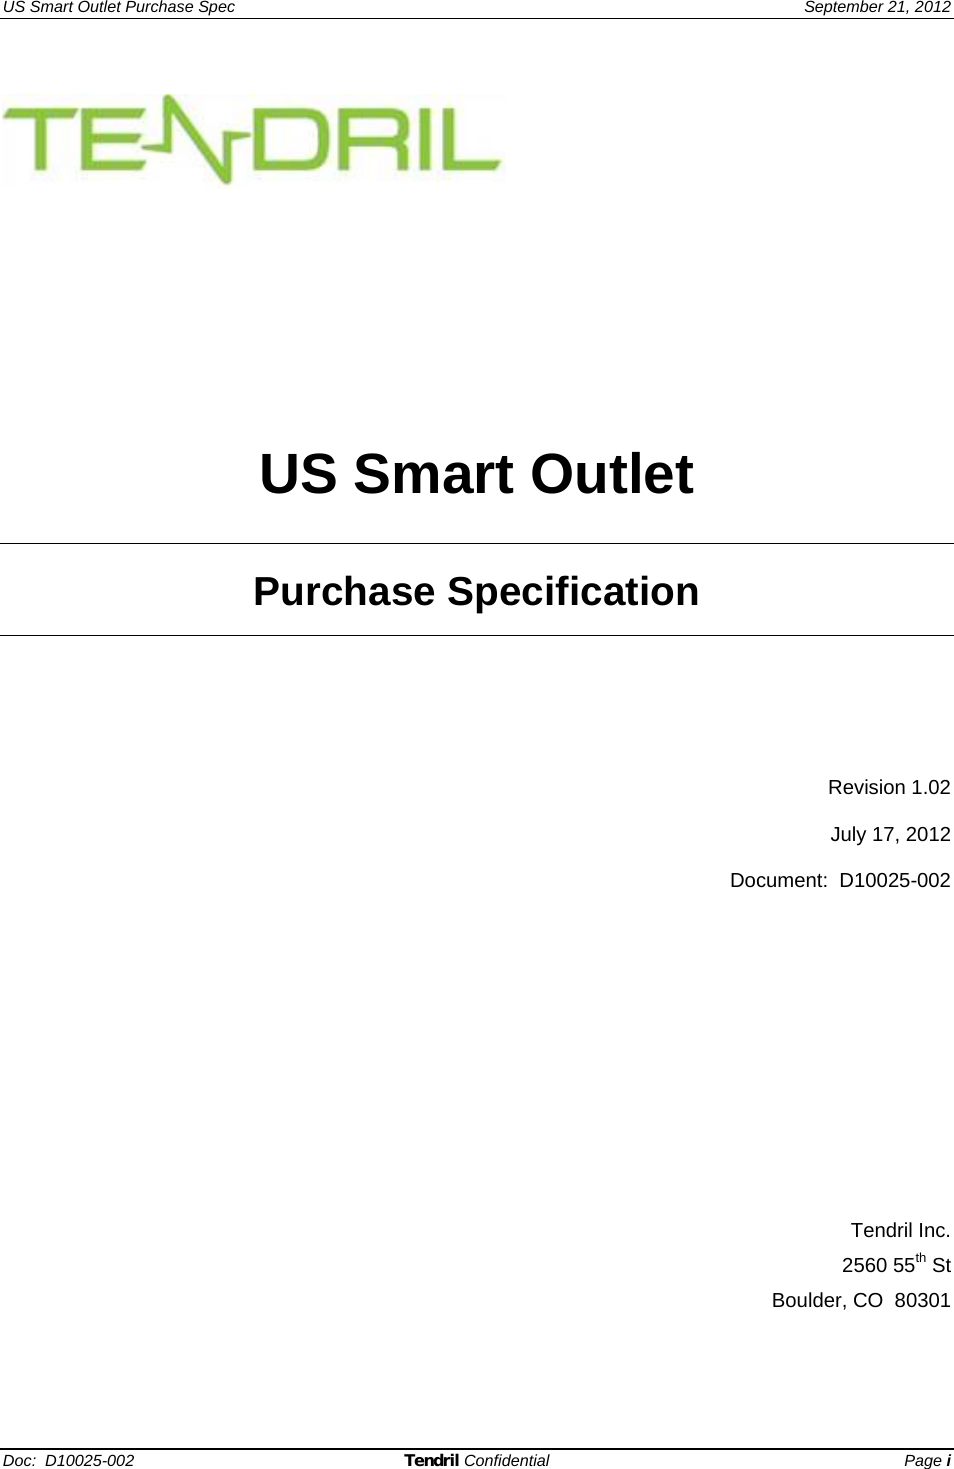 US Smart Outlet Purchase Spec   September 21, 2012 Doc:  D10025-002 Tendril Confidential Page i             US Smart Outlet   Purchase Specification         Revision 1.02  July 17, 2012  Document:  D10025-002                Tendril Inc.  2560 55th St    Boulder, CO  80301  